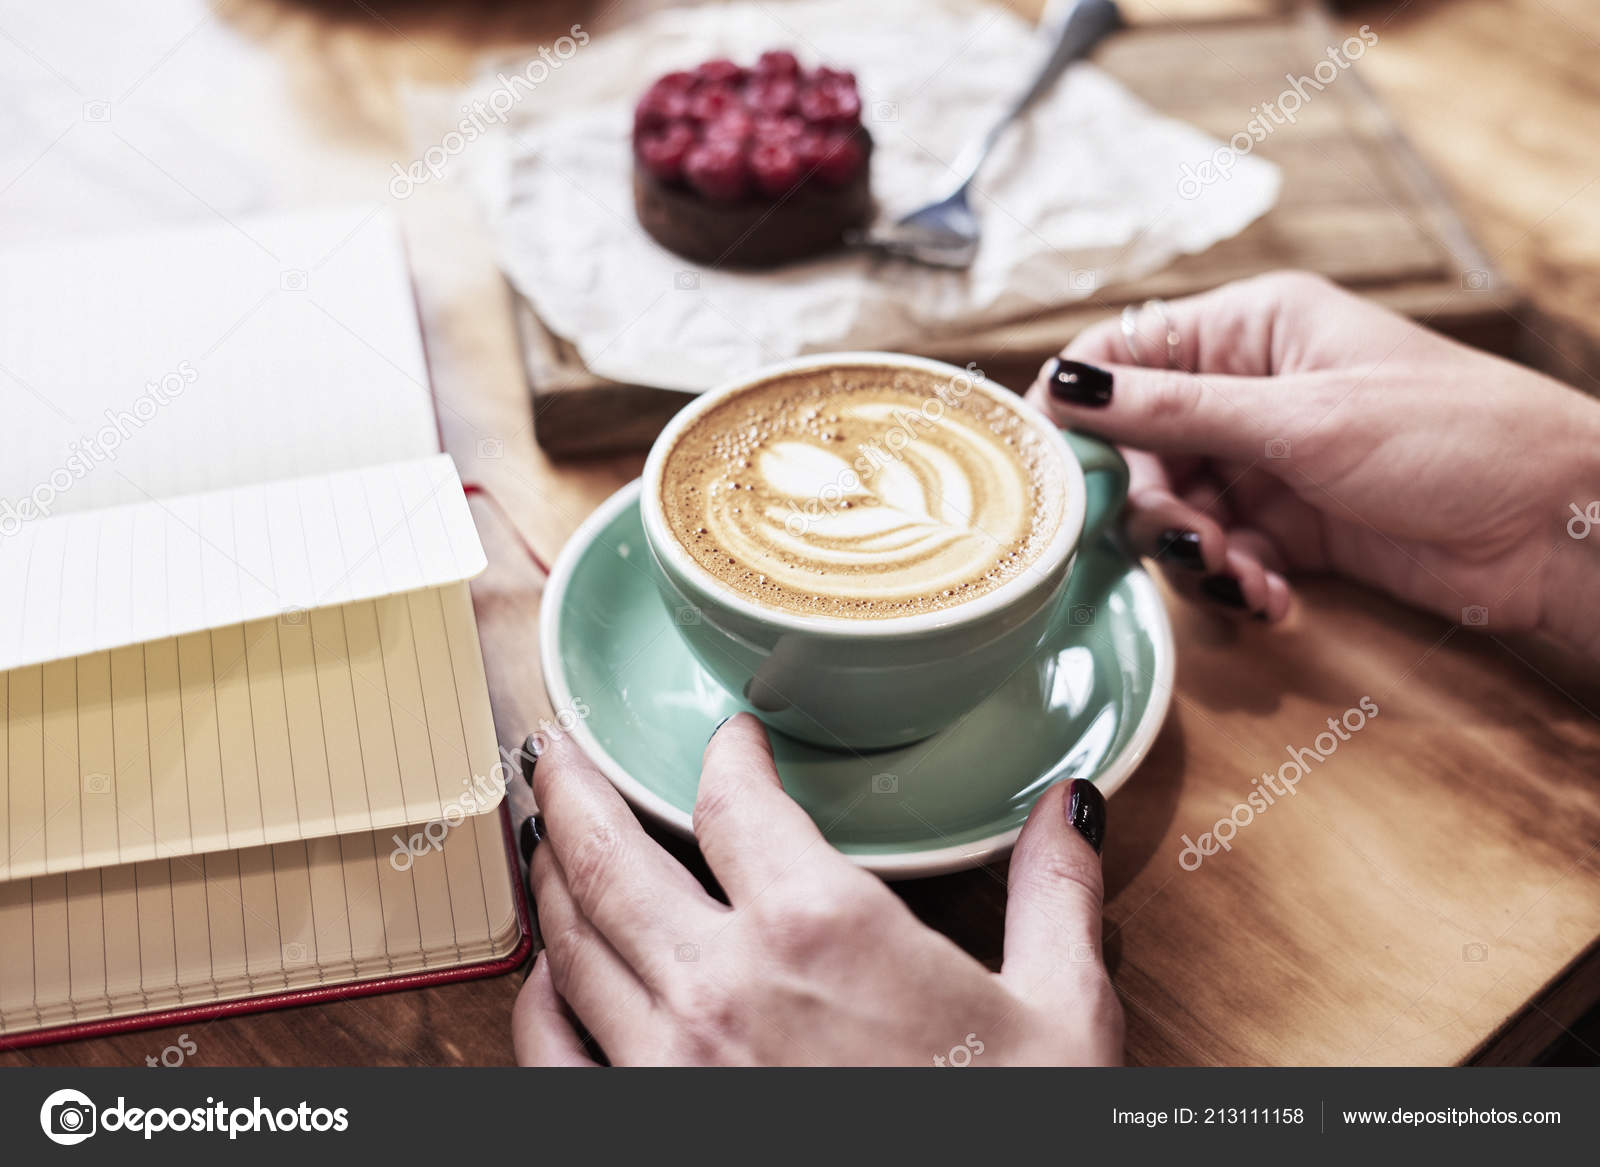 Cup Of Coffee Latte On Wooden Table Or Background In Woman Hands From Above Having Lunch In Cafe Opened Notebook Space For Design Template Stock Photo C Pogorelova 213111158